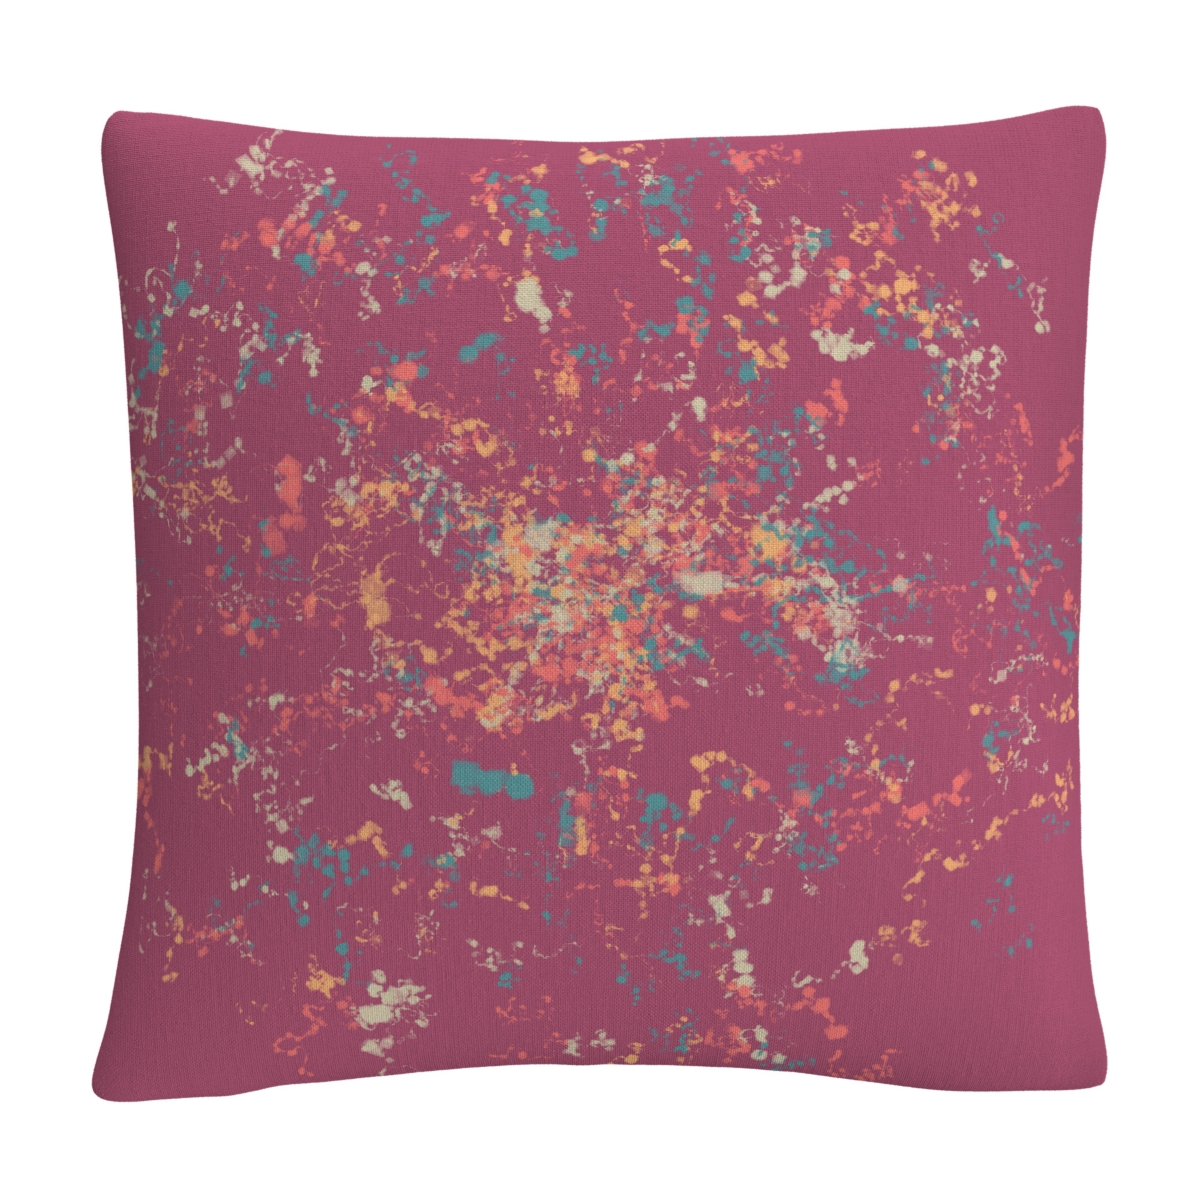 Abc Speckled Colorful Splatter Abstract 8Decorative Pillow, 16 x 16